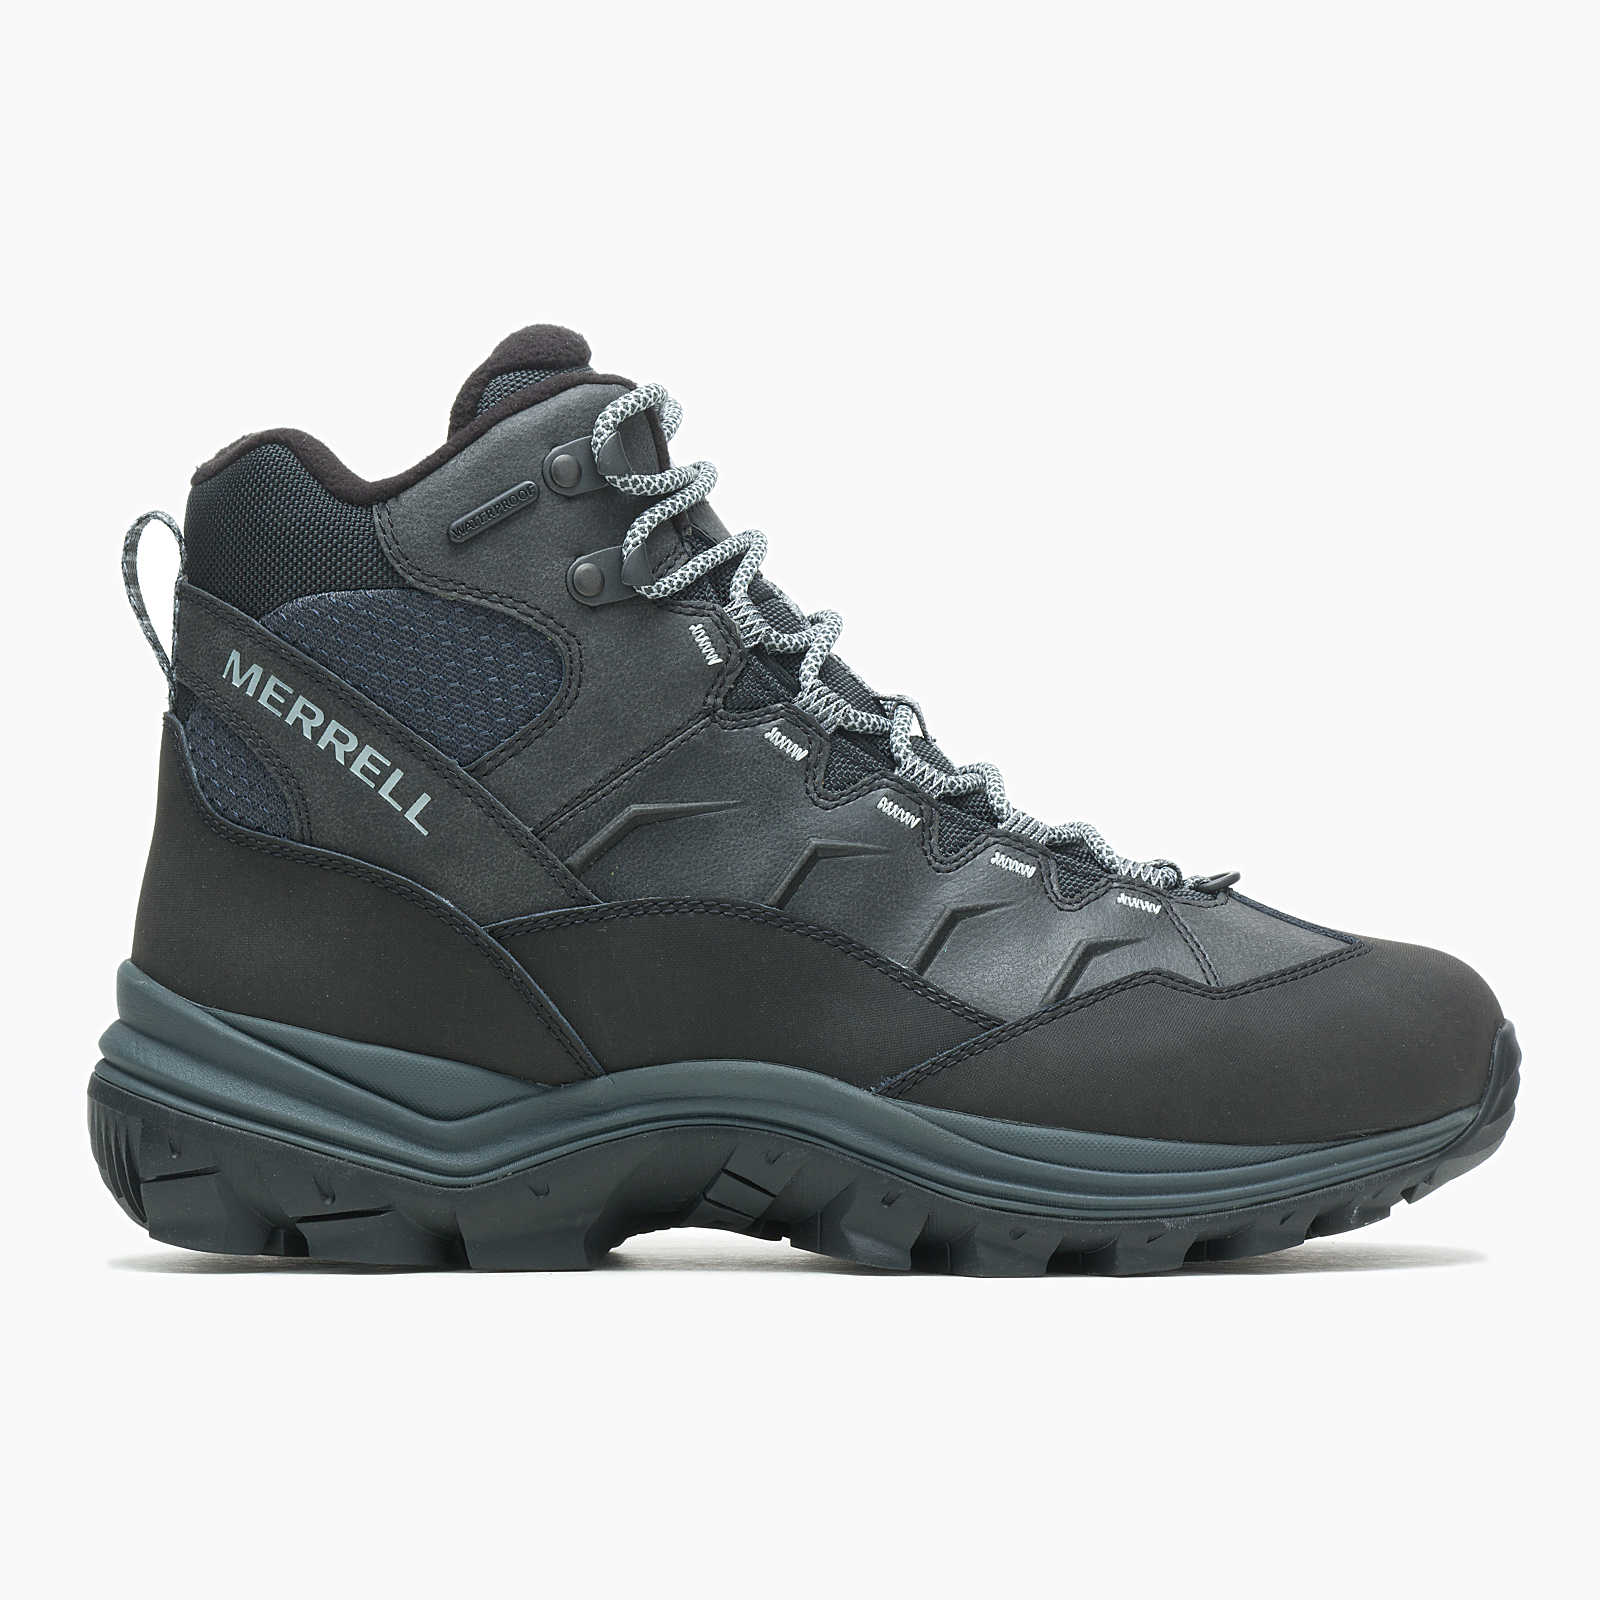 Merrell Thermo Chill Mid Waterproof